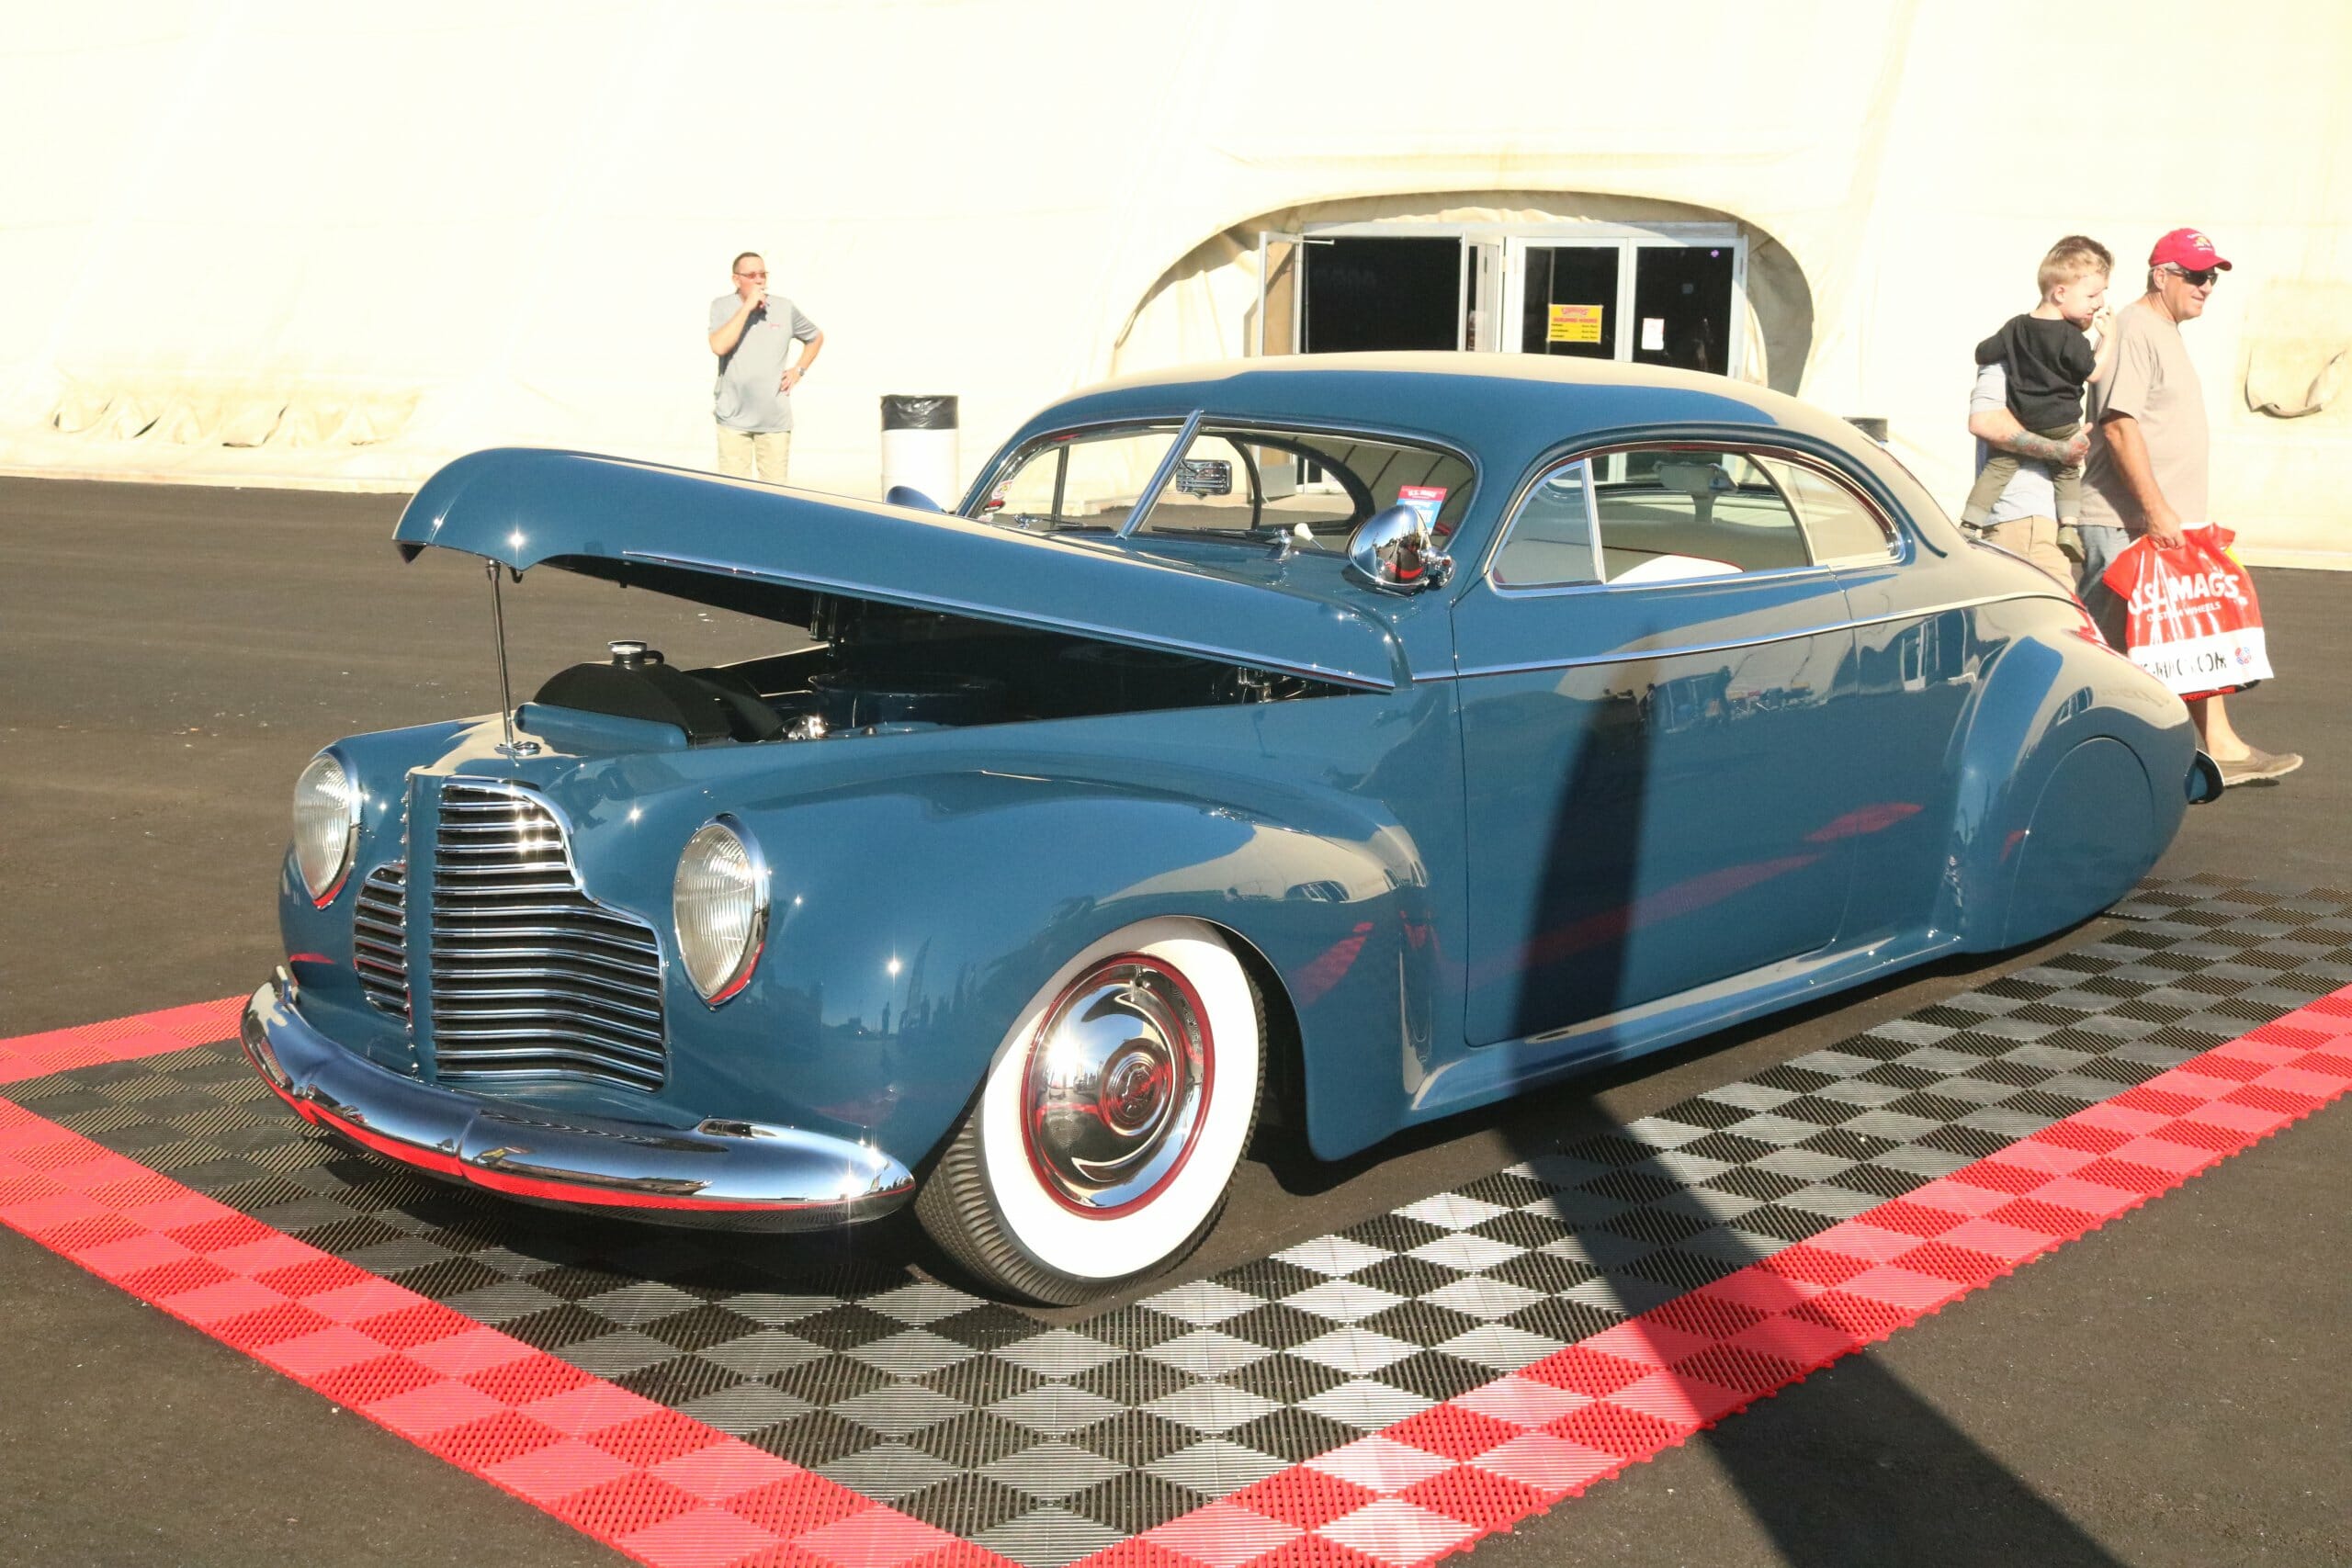 Goodguys, Goodguys&#8217; Top 12 featured at Southwest Nationals, ClassicCars.com Journal